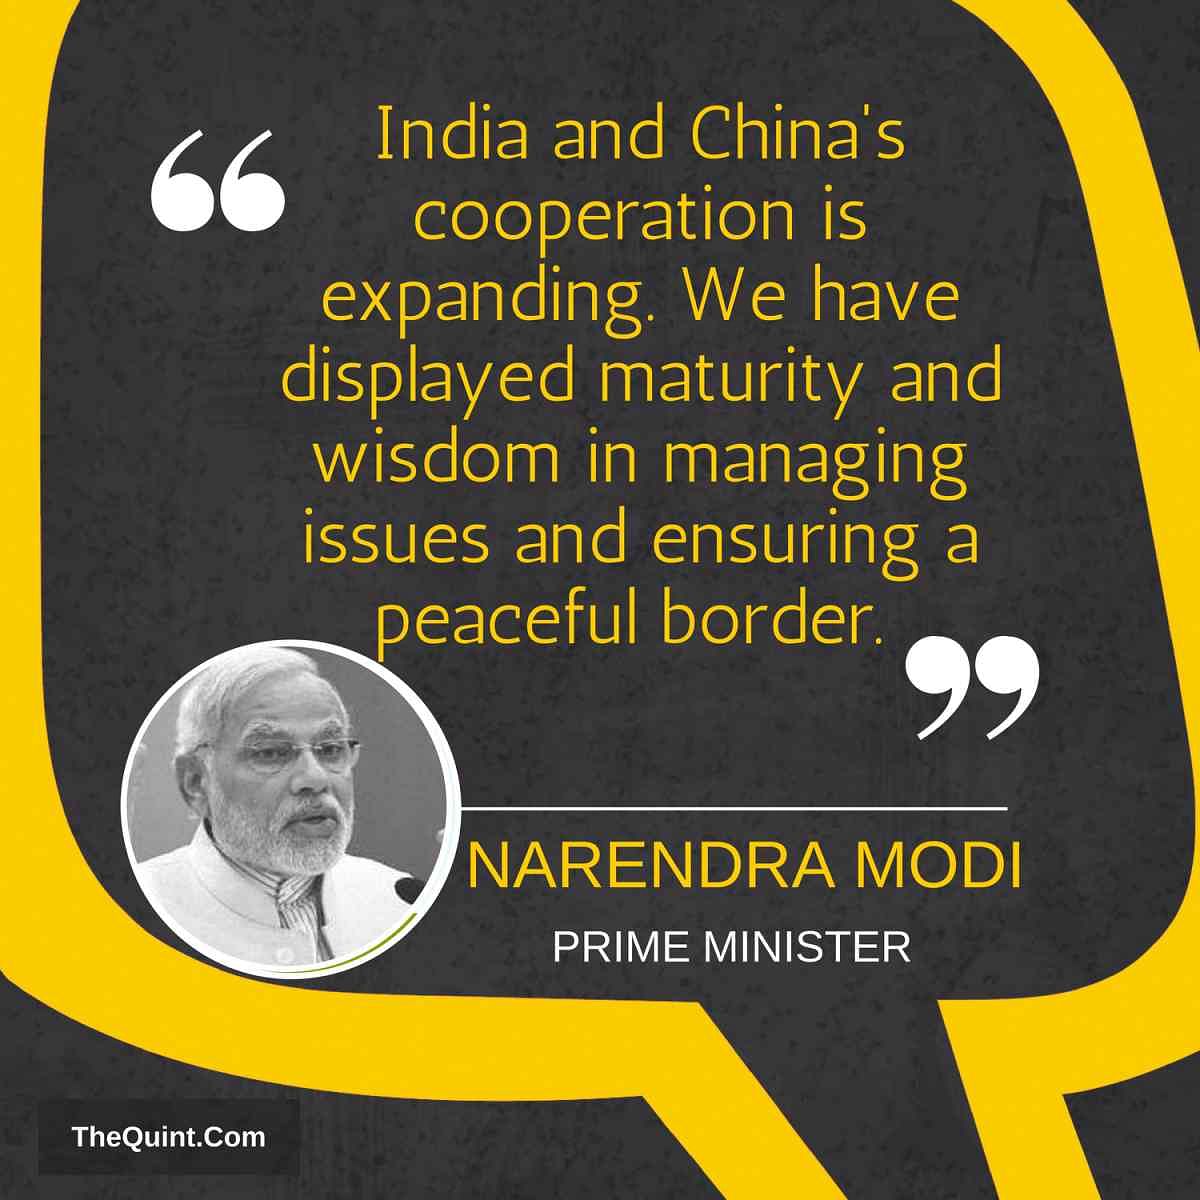 Prime Minister Narendra Modi addressed the gathering in Singapore – the last stop of his three-nation journey.